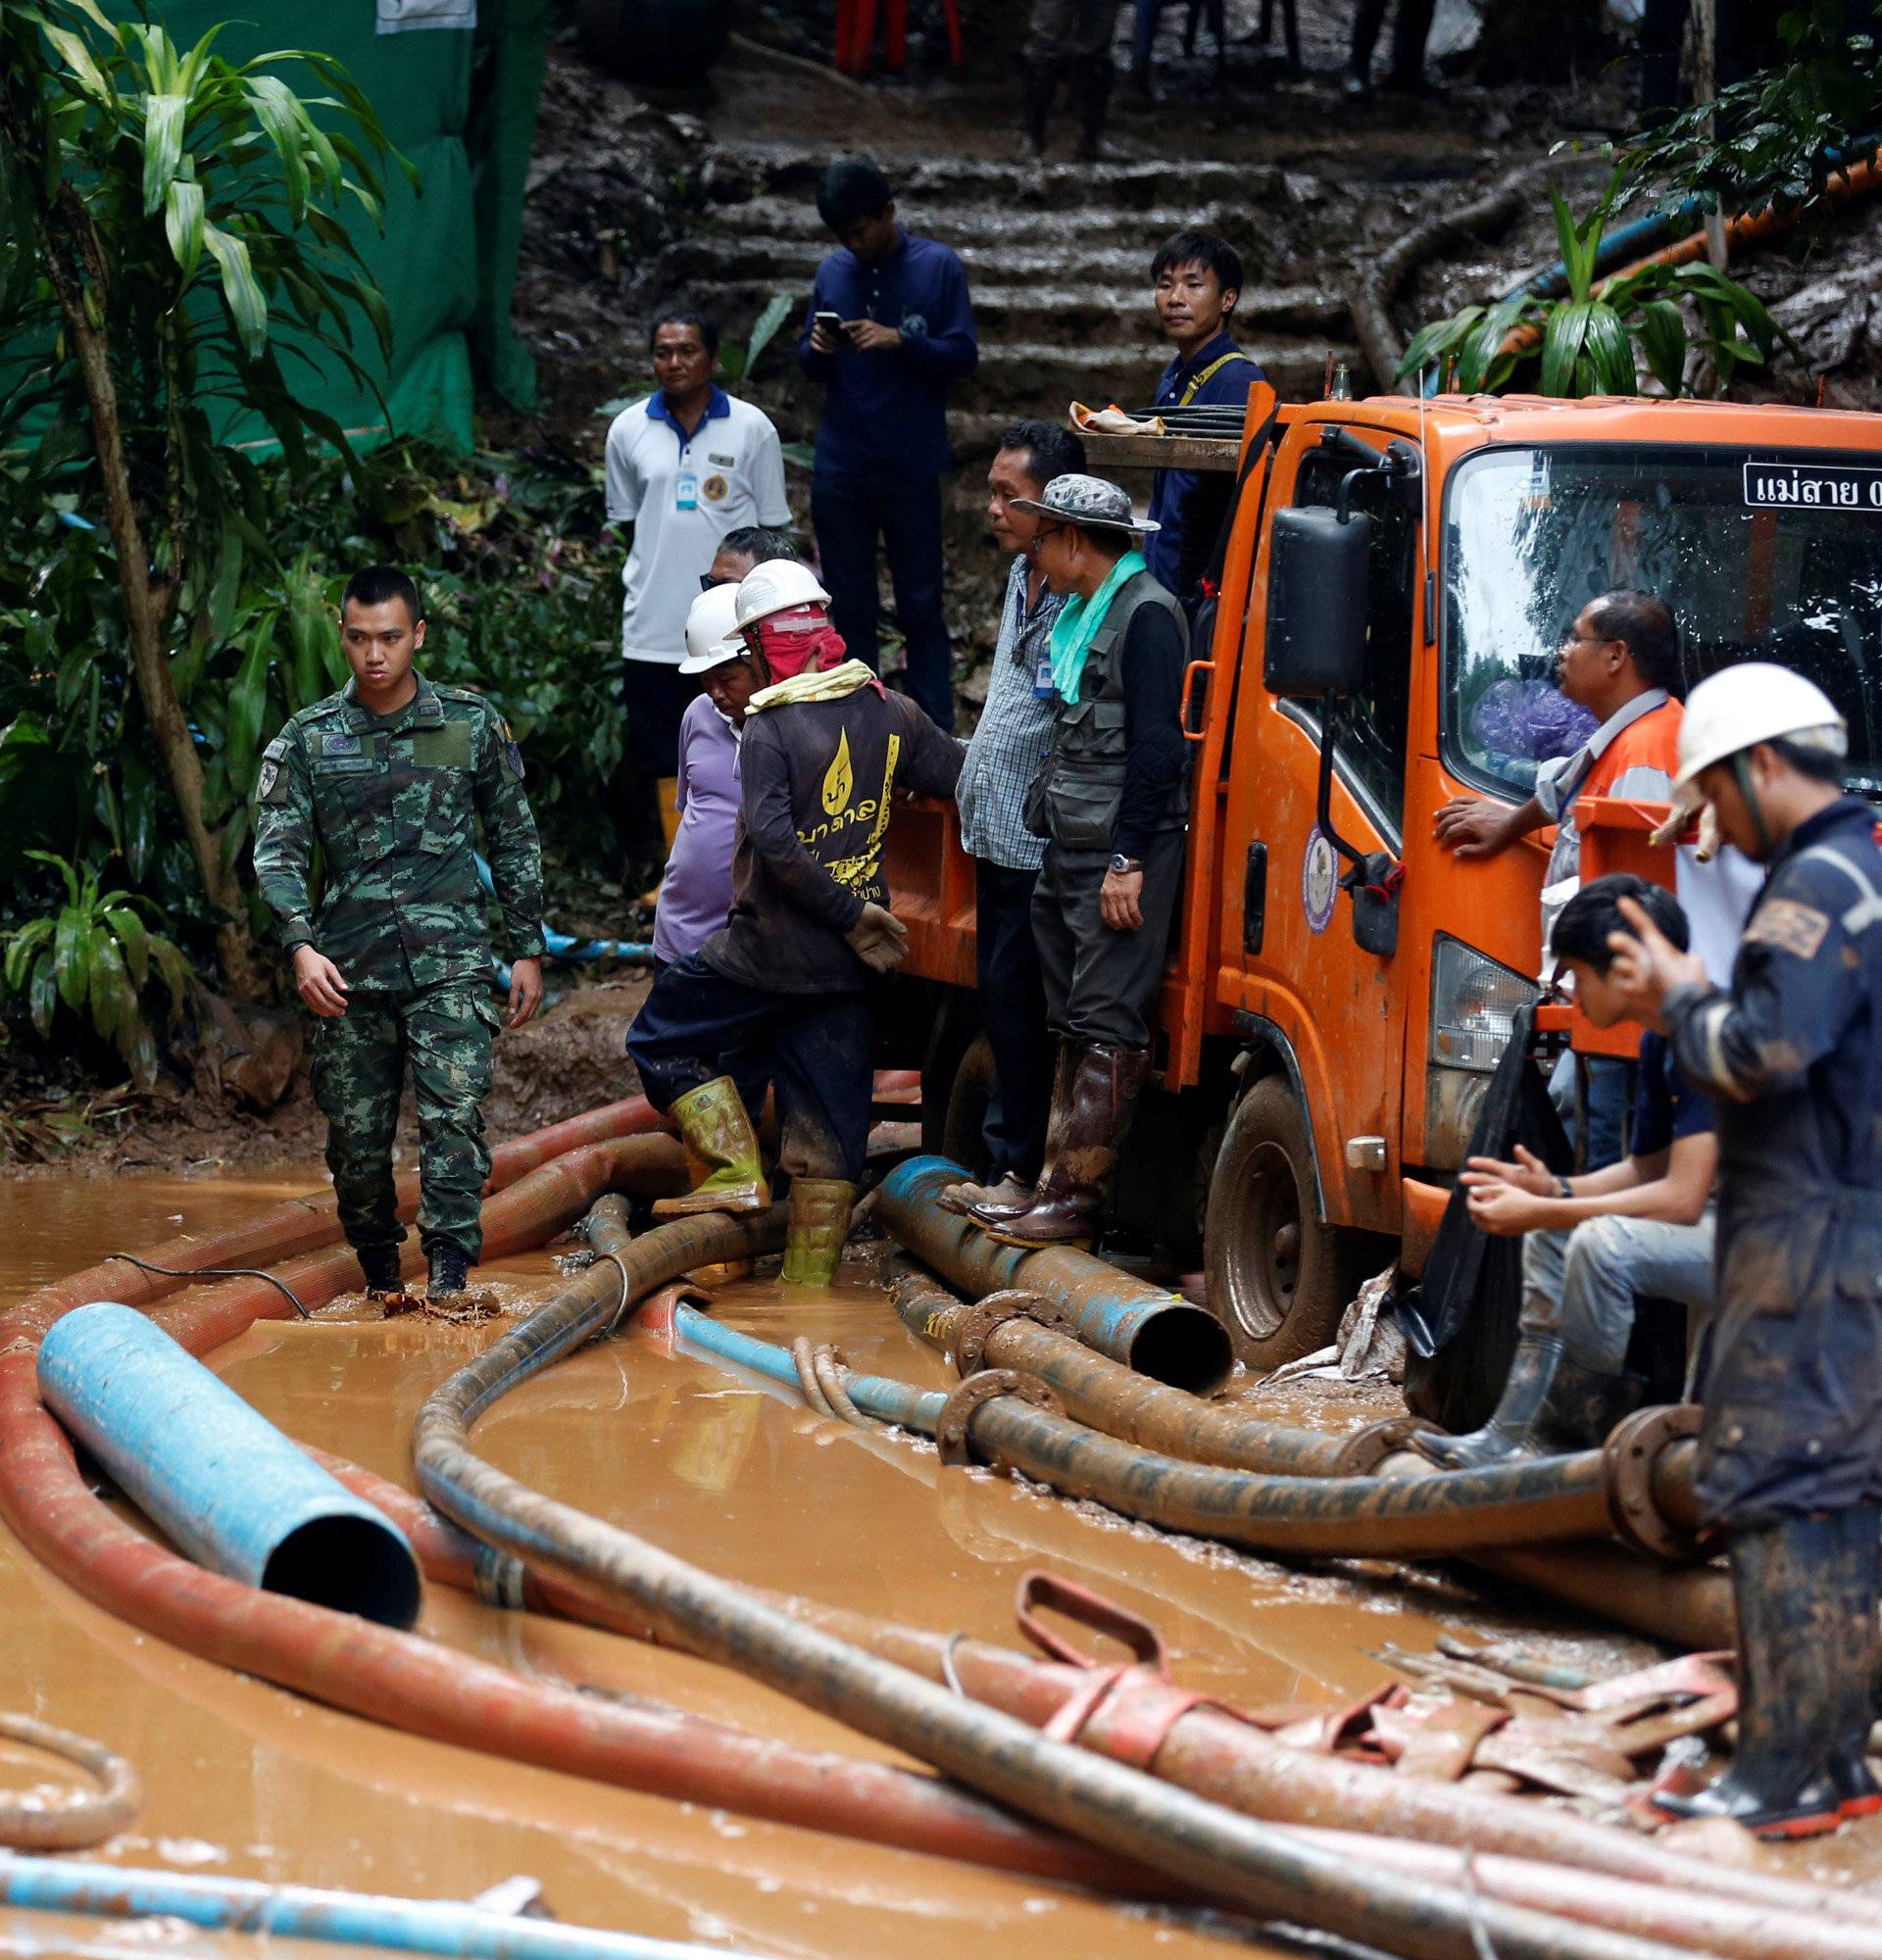 Soldiers and rescue workers work near Tham Luang cave complex, as an ongoing search for members of an under-16 soccer team and their coach continues, in the northern province of Chiang Rai